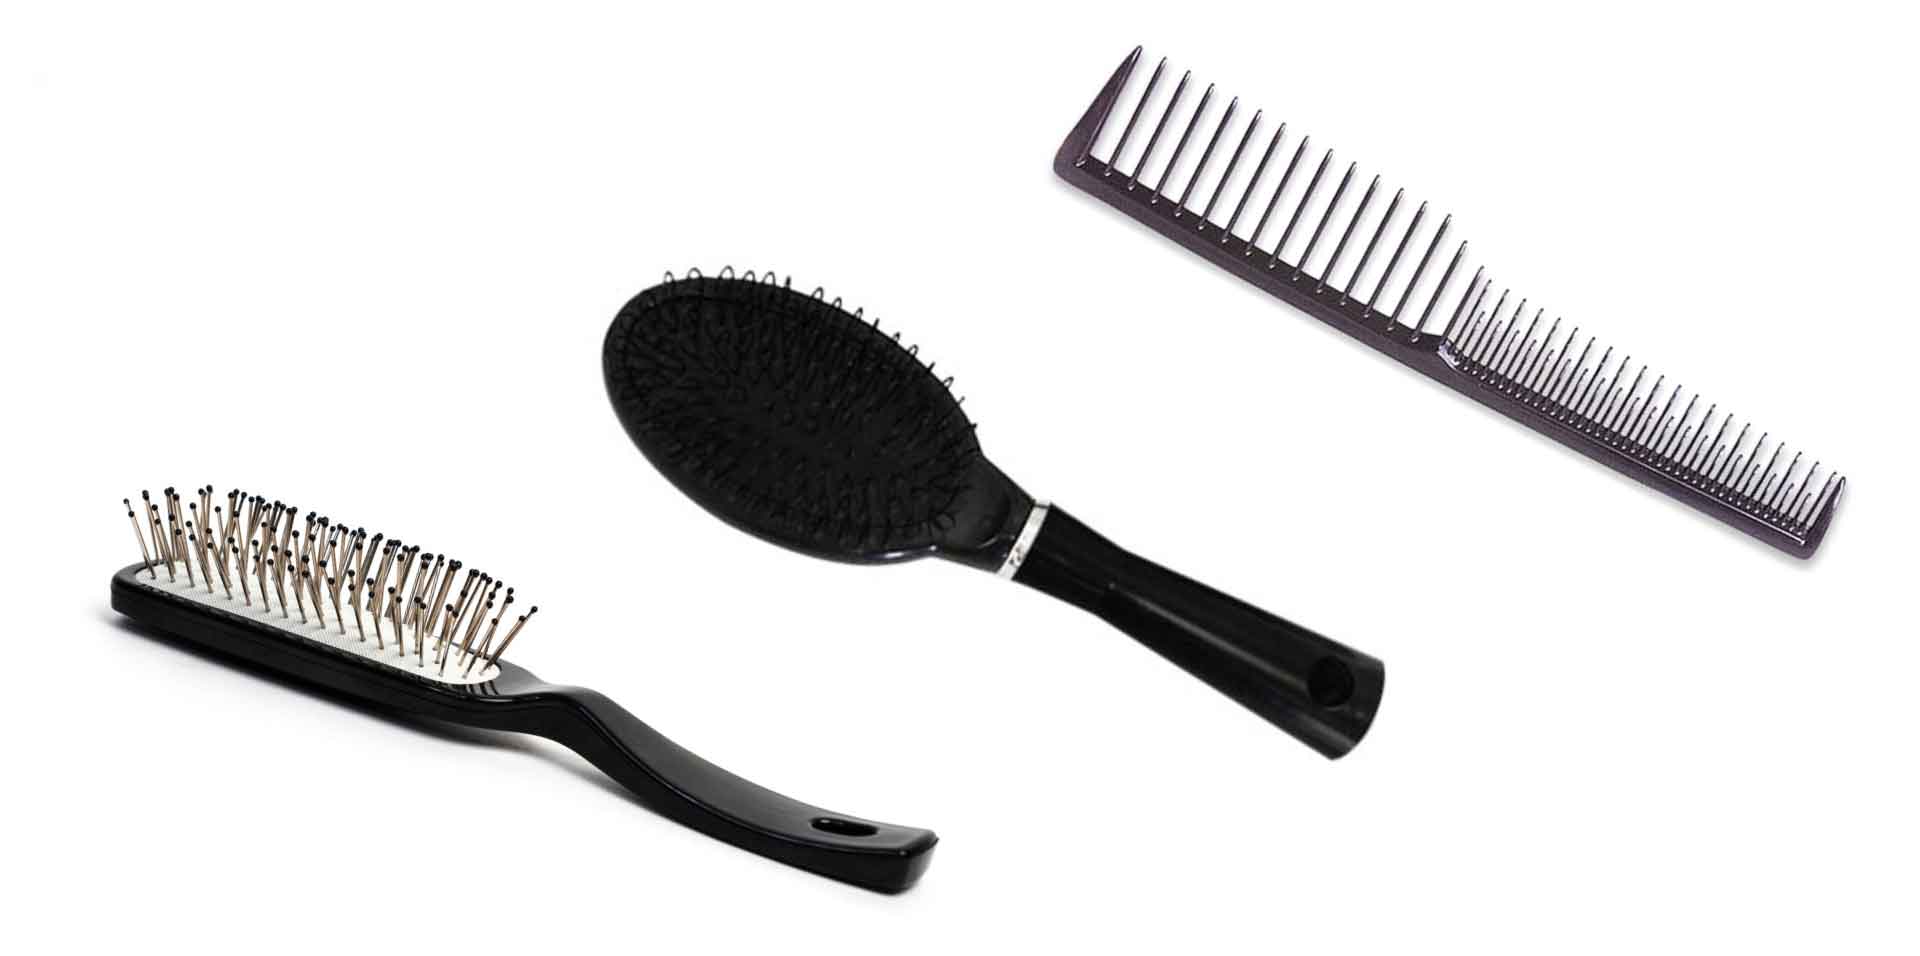 Hairpiece Combs & Brushes